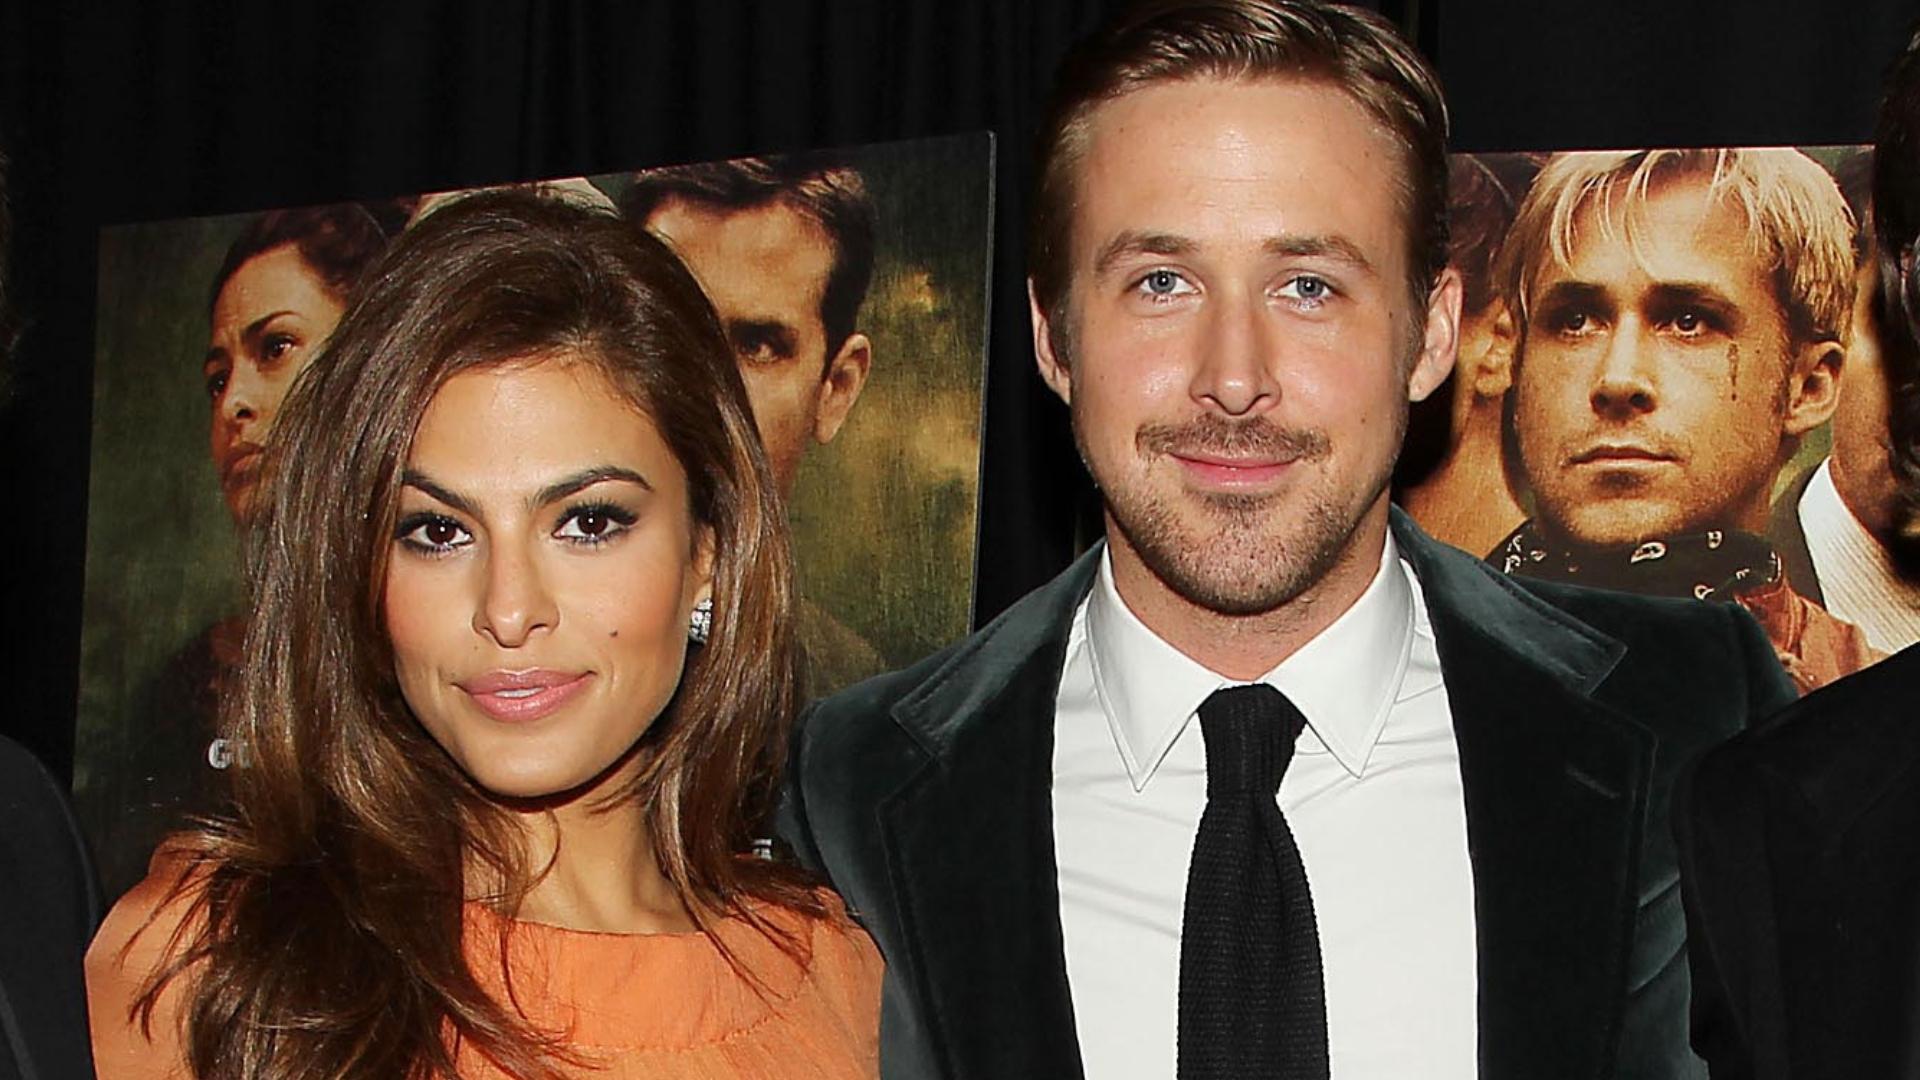 Ryan Gosling and Eva Mendes Third Baby Can Save Their Marriage?